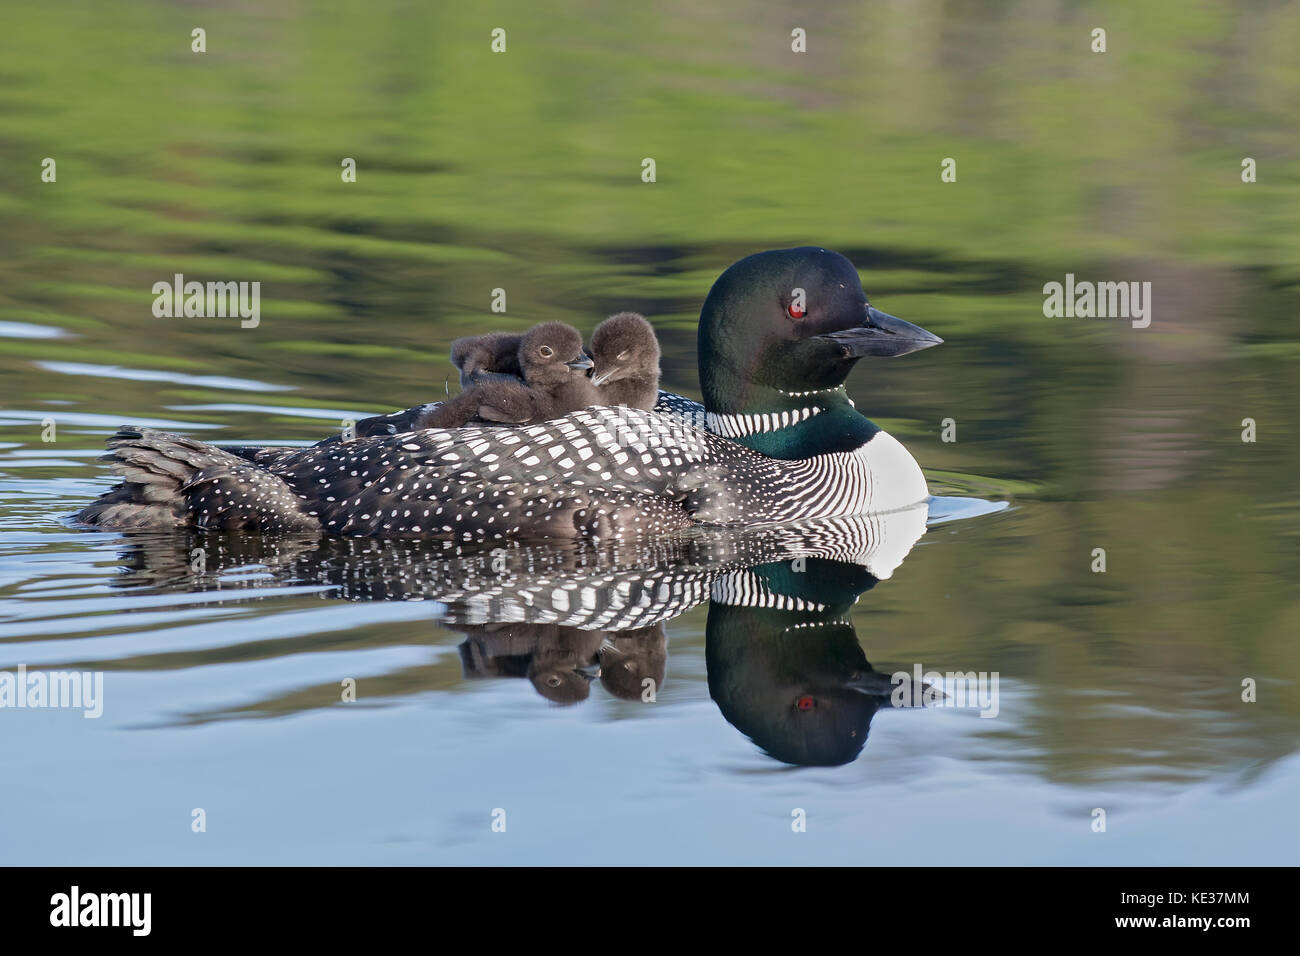 Adult common loon (Gavia immer) and chicks back-riding as they do for the first two weeks after hatching, central Alberta, Canada Stock Photo